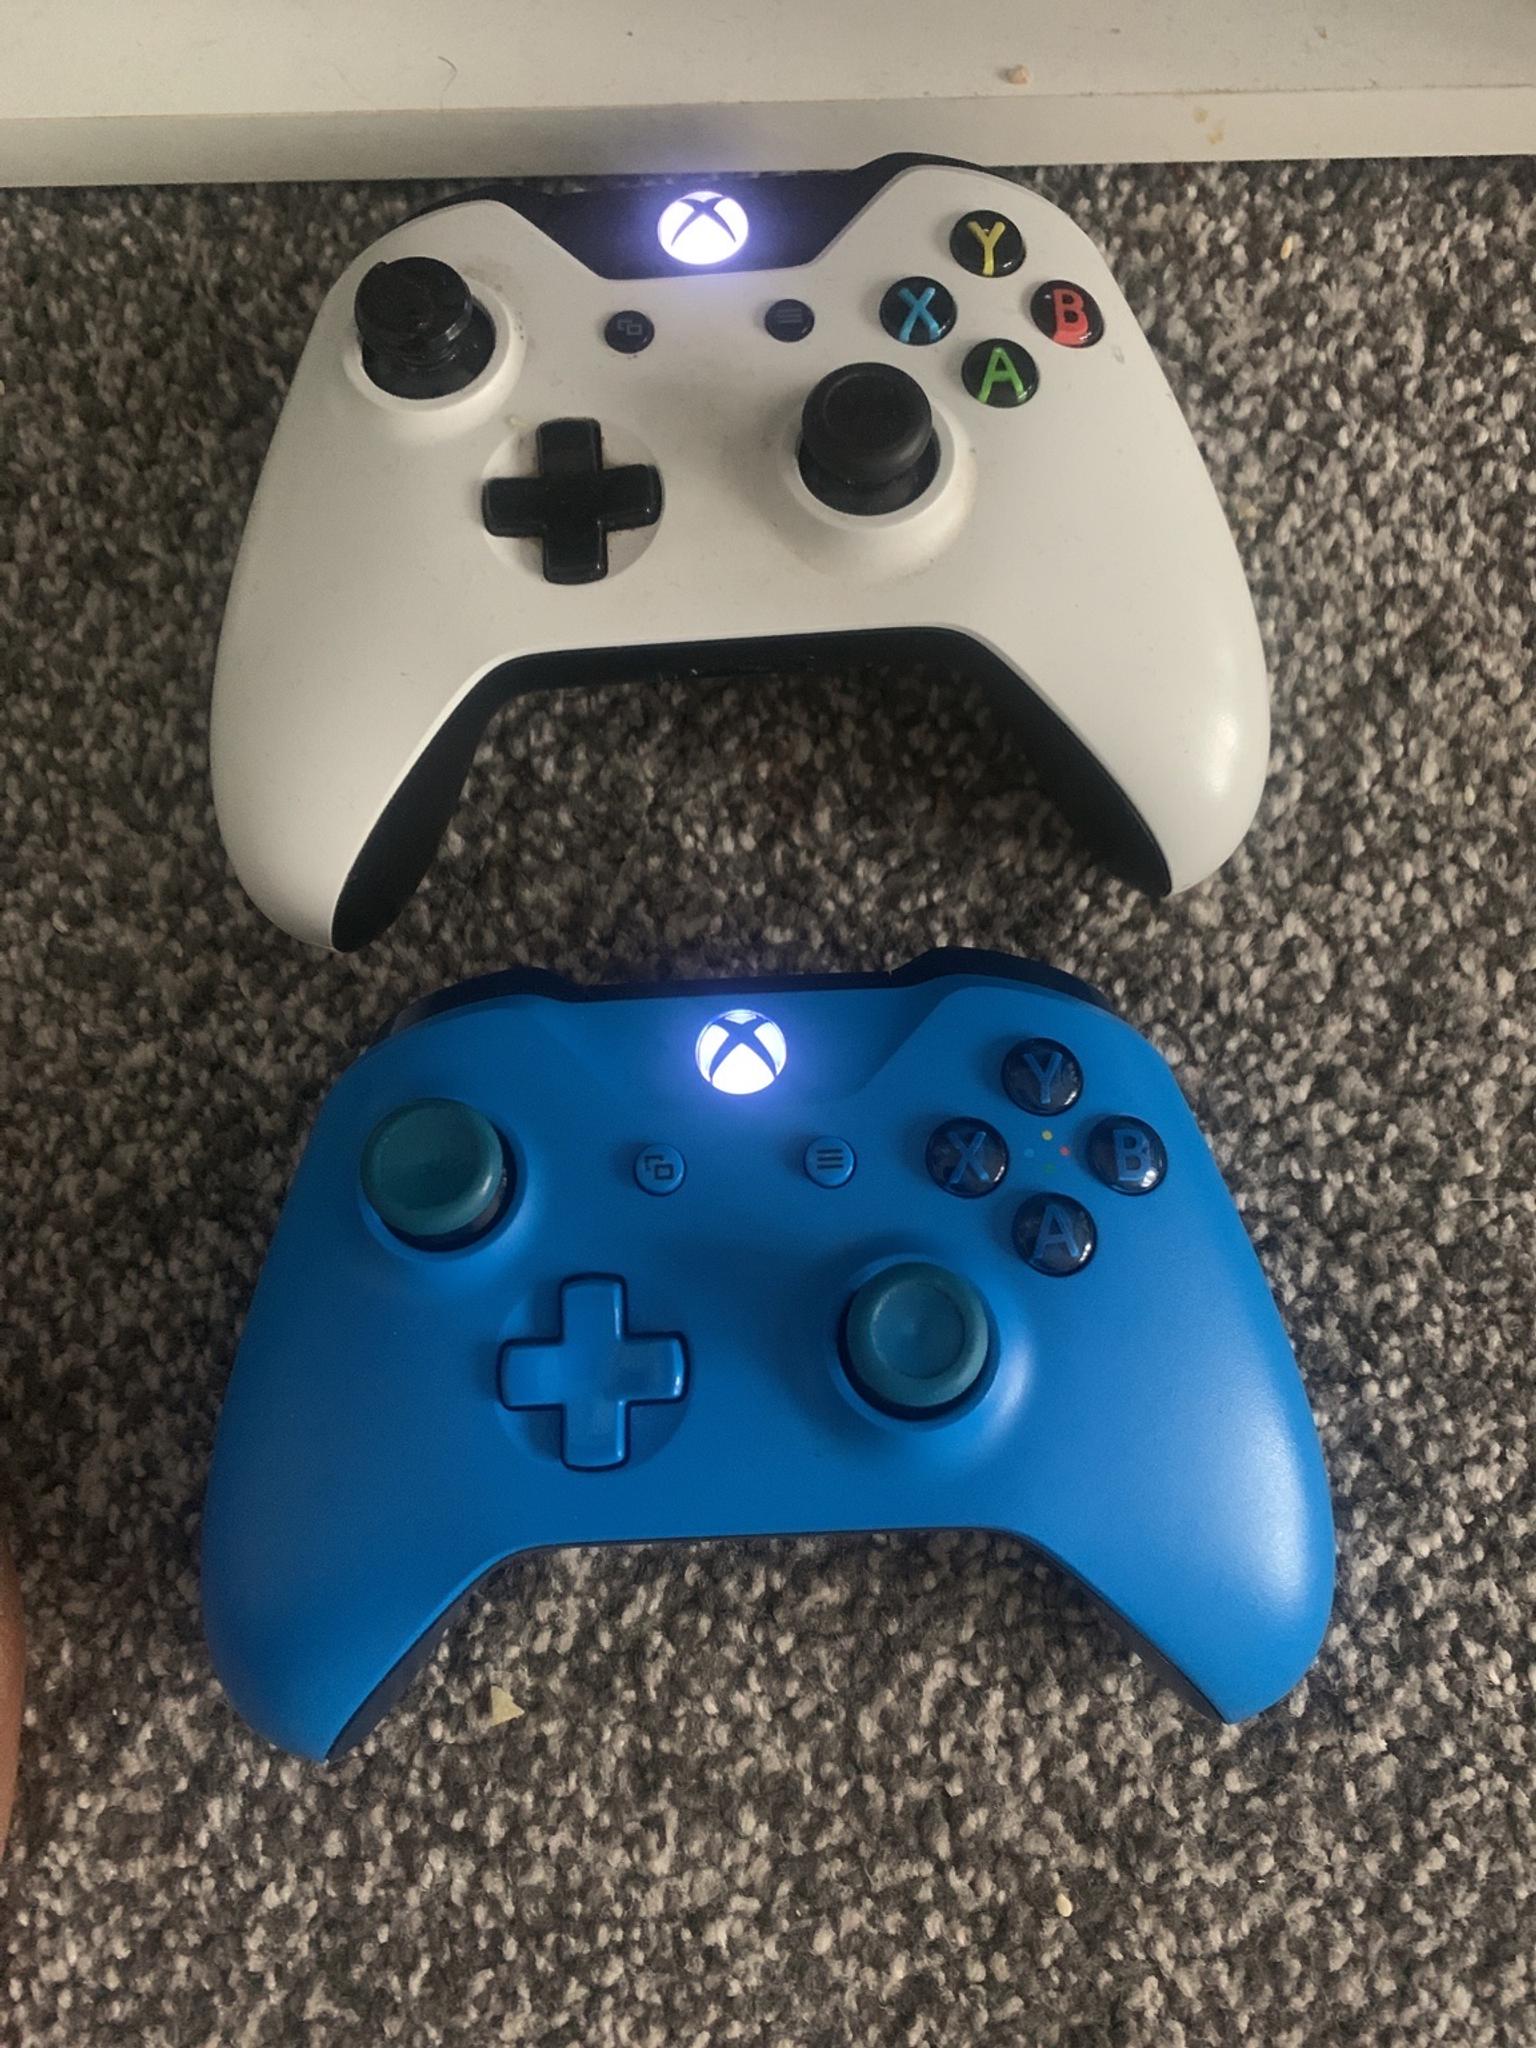 domesticate Popular discord Xbox one console (365 gb) in BL2 Bolton for £150.00 for sale | Shpock